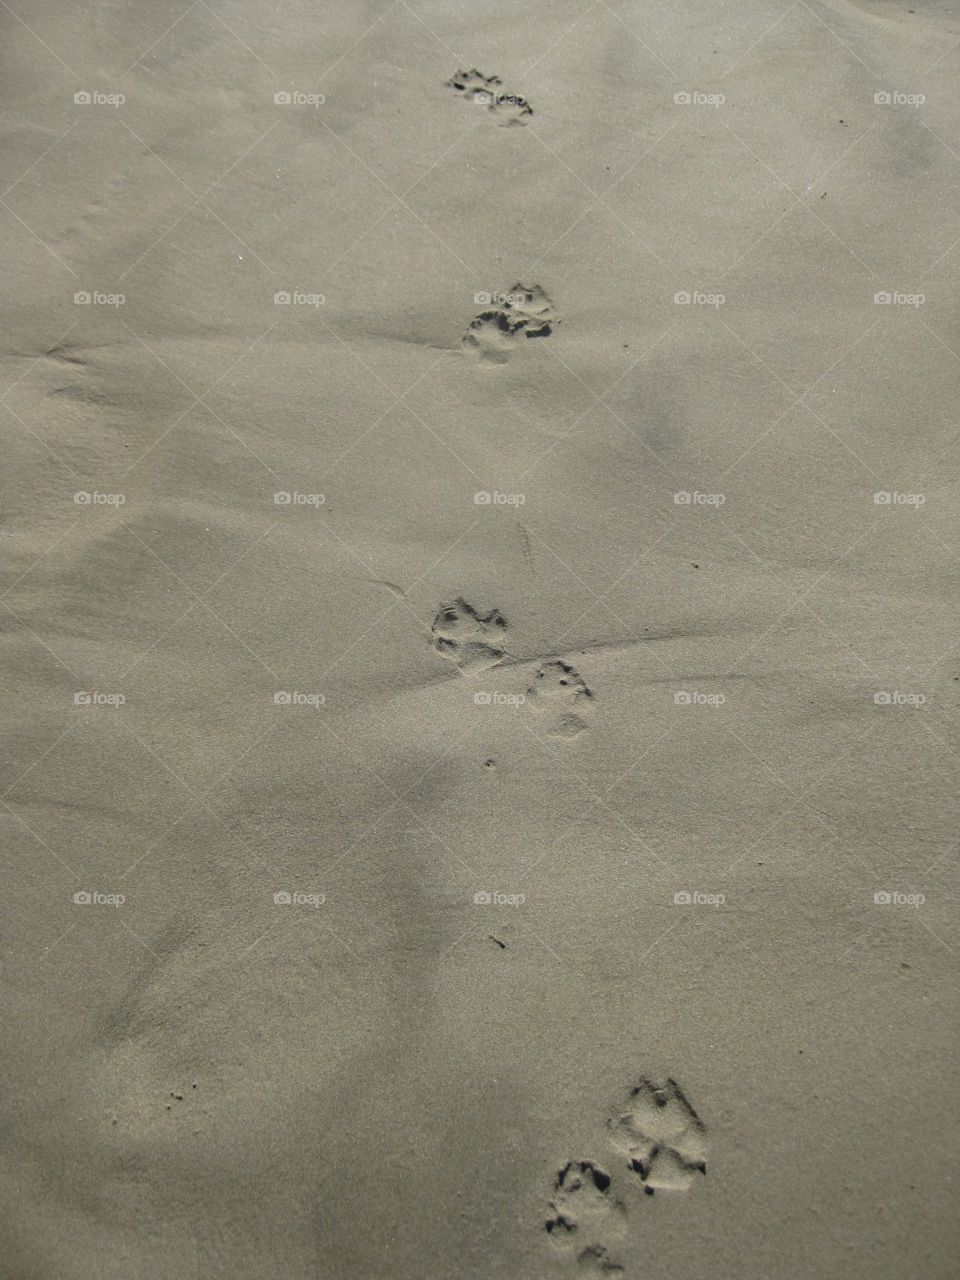 Paw prints in the sand. Nicaragua beach. Following paw prints